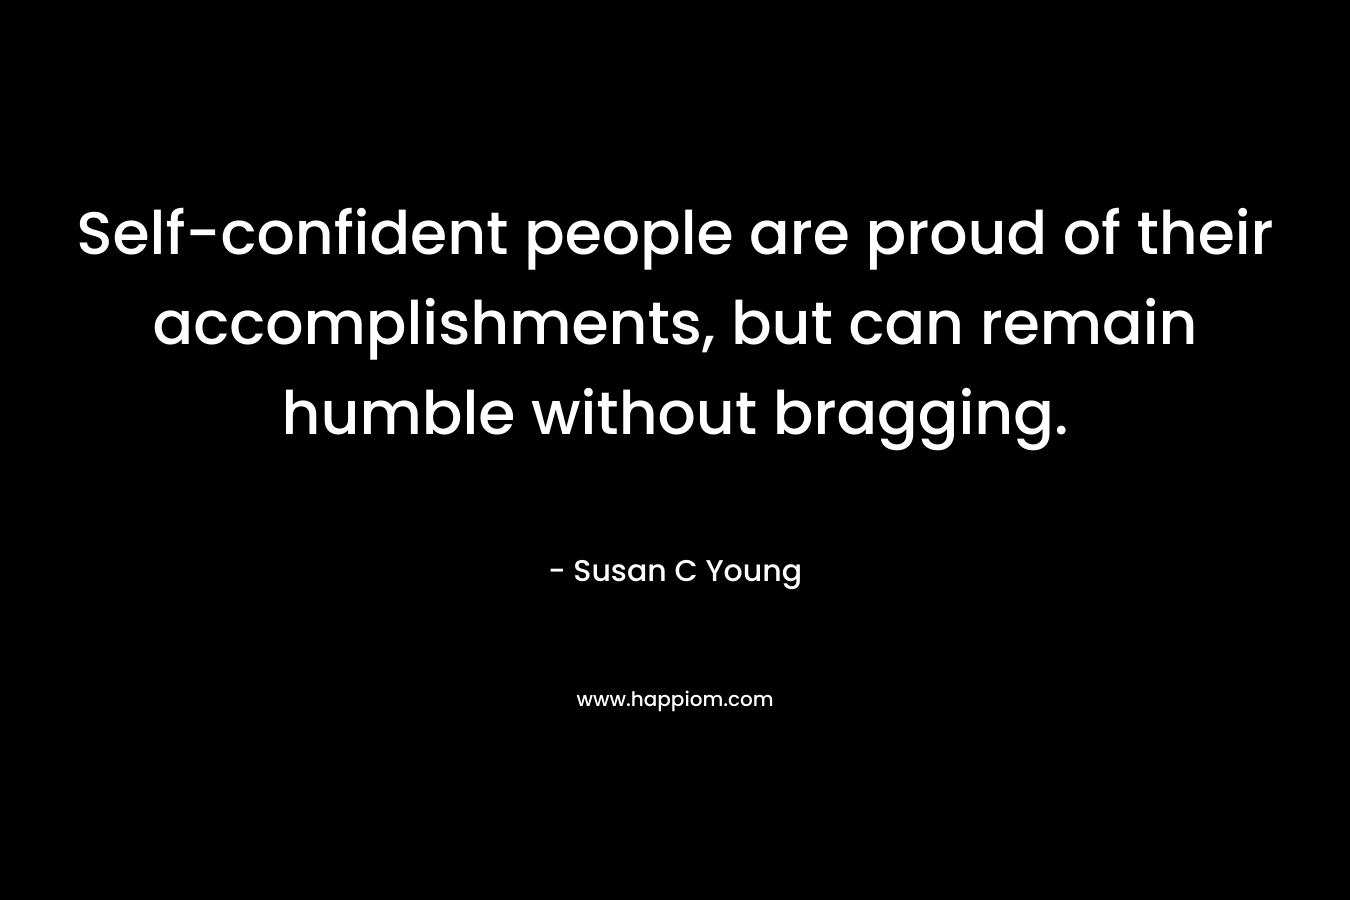 Self-confident people are proud of their accomplishments, but can remain humble without bragging.